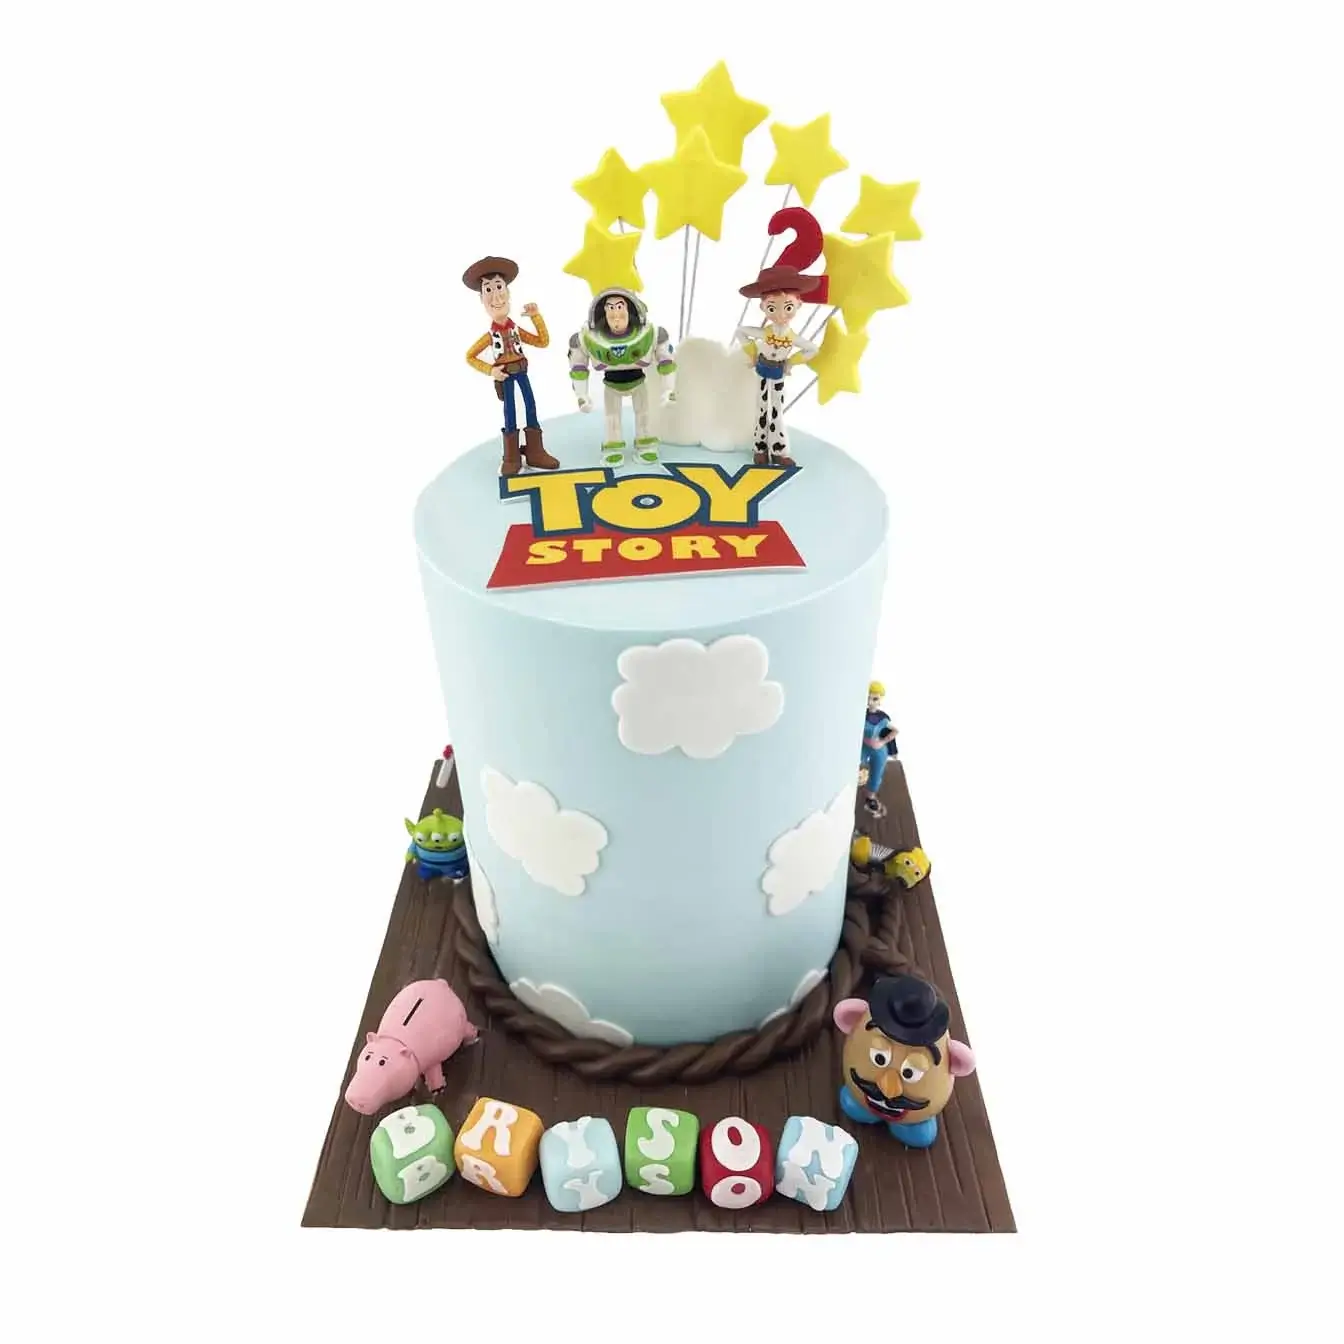 A whimsical and colorful Toy Story cake featuring Mr. Potato Head, Buzz, Woody, Bo Peep, Alien, and Slinky Dog, with intricate details and expert design.